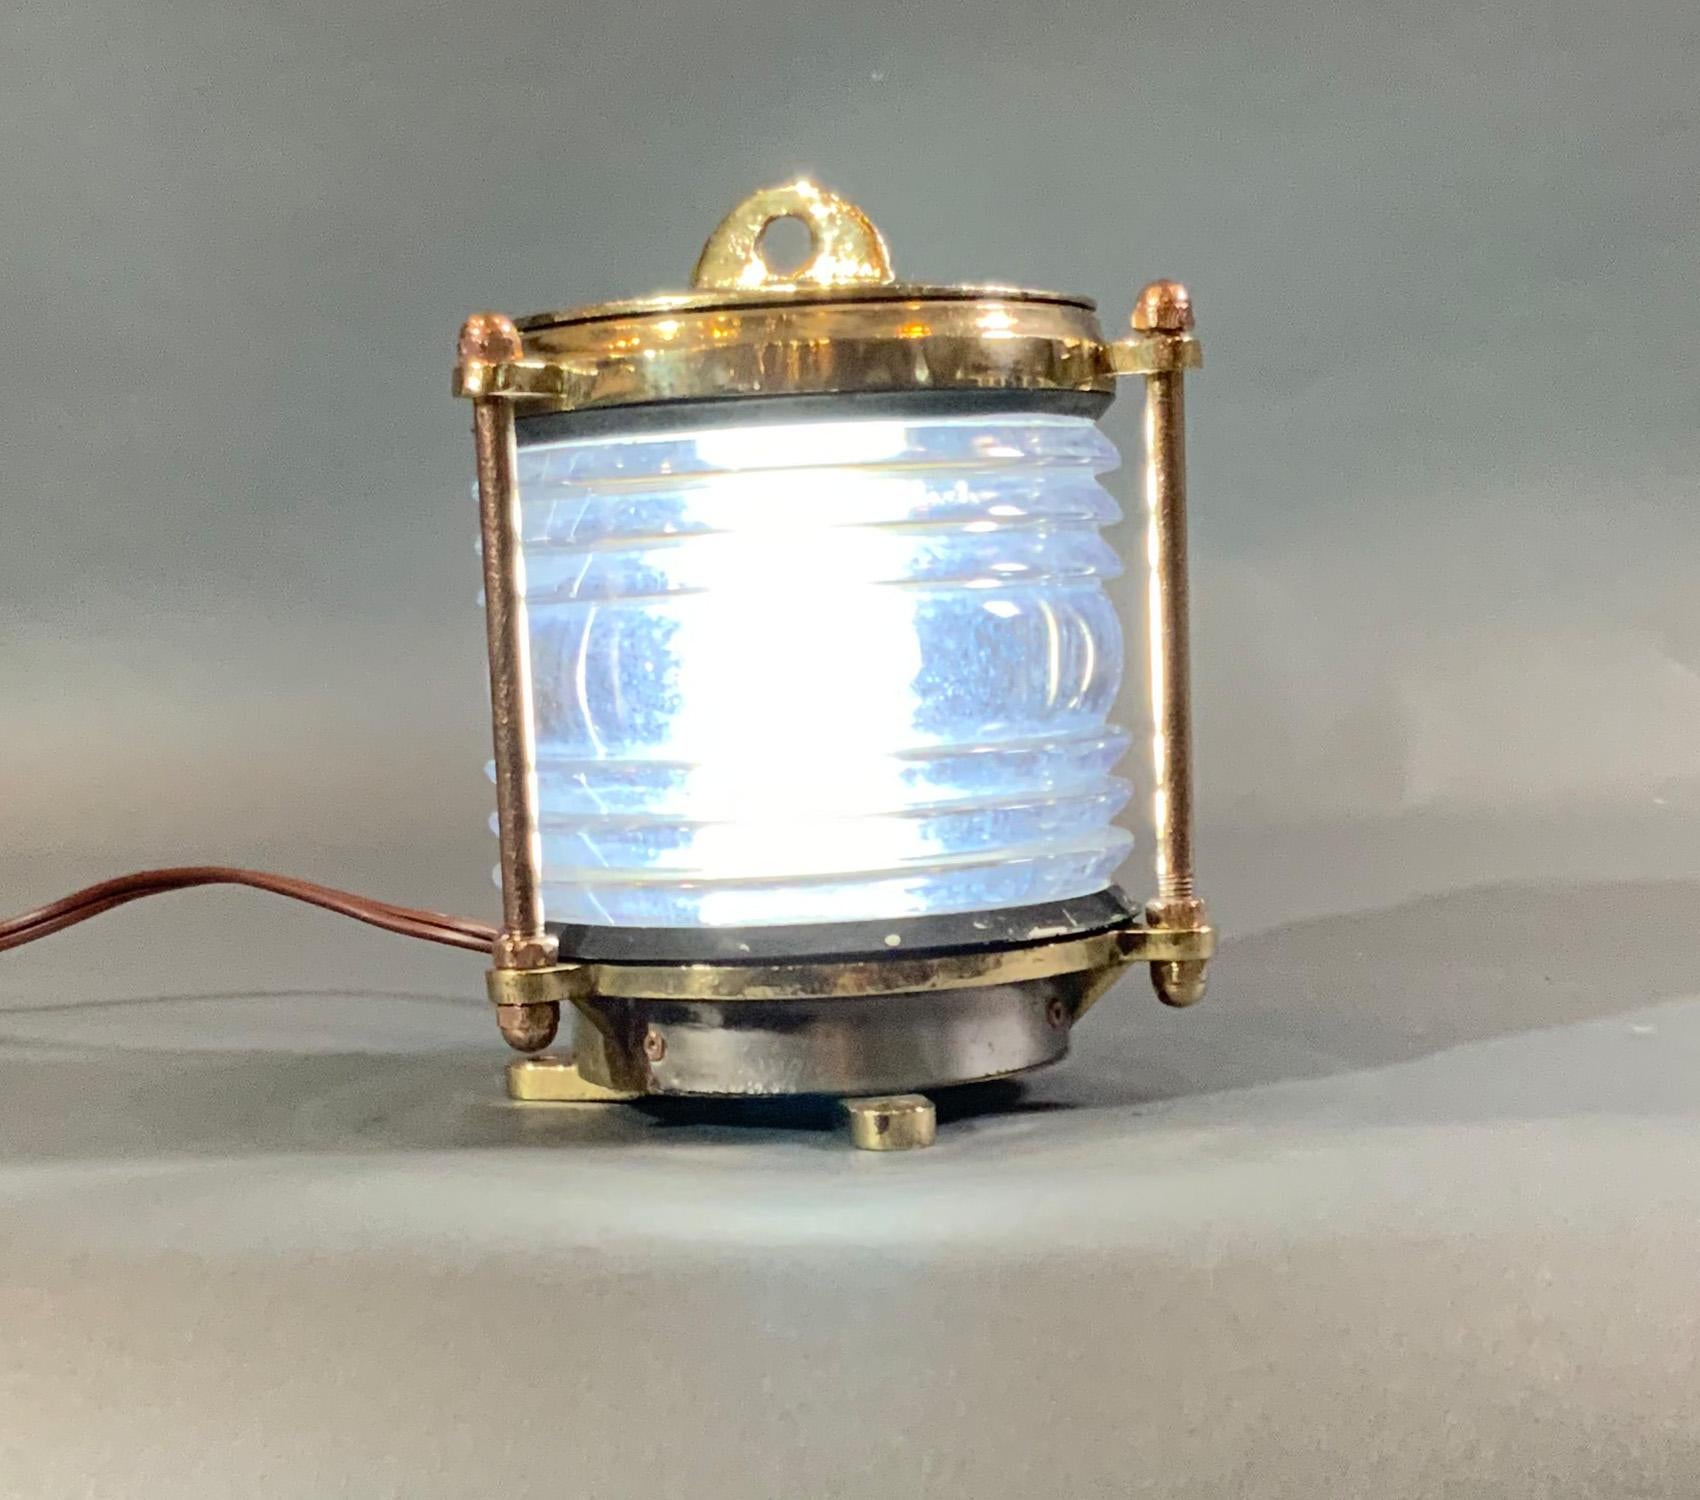 Solid brass dock light with clear glass Fresnel lens. Wired with electricity. Three flange feet for mounting.

Weight: 6 LBS
Overall dimensions: 8” H x 7” D
Made: English
Material: Brass
Date: Circa 2000.